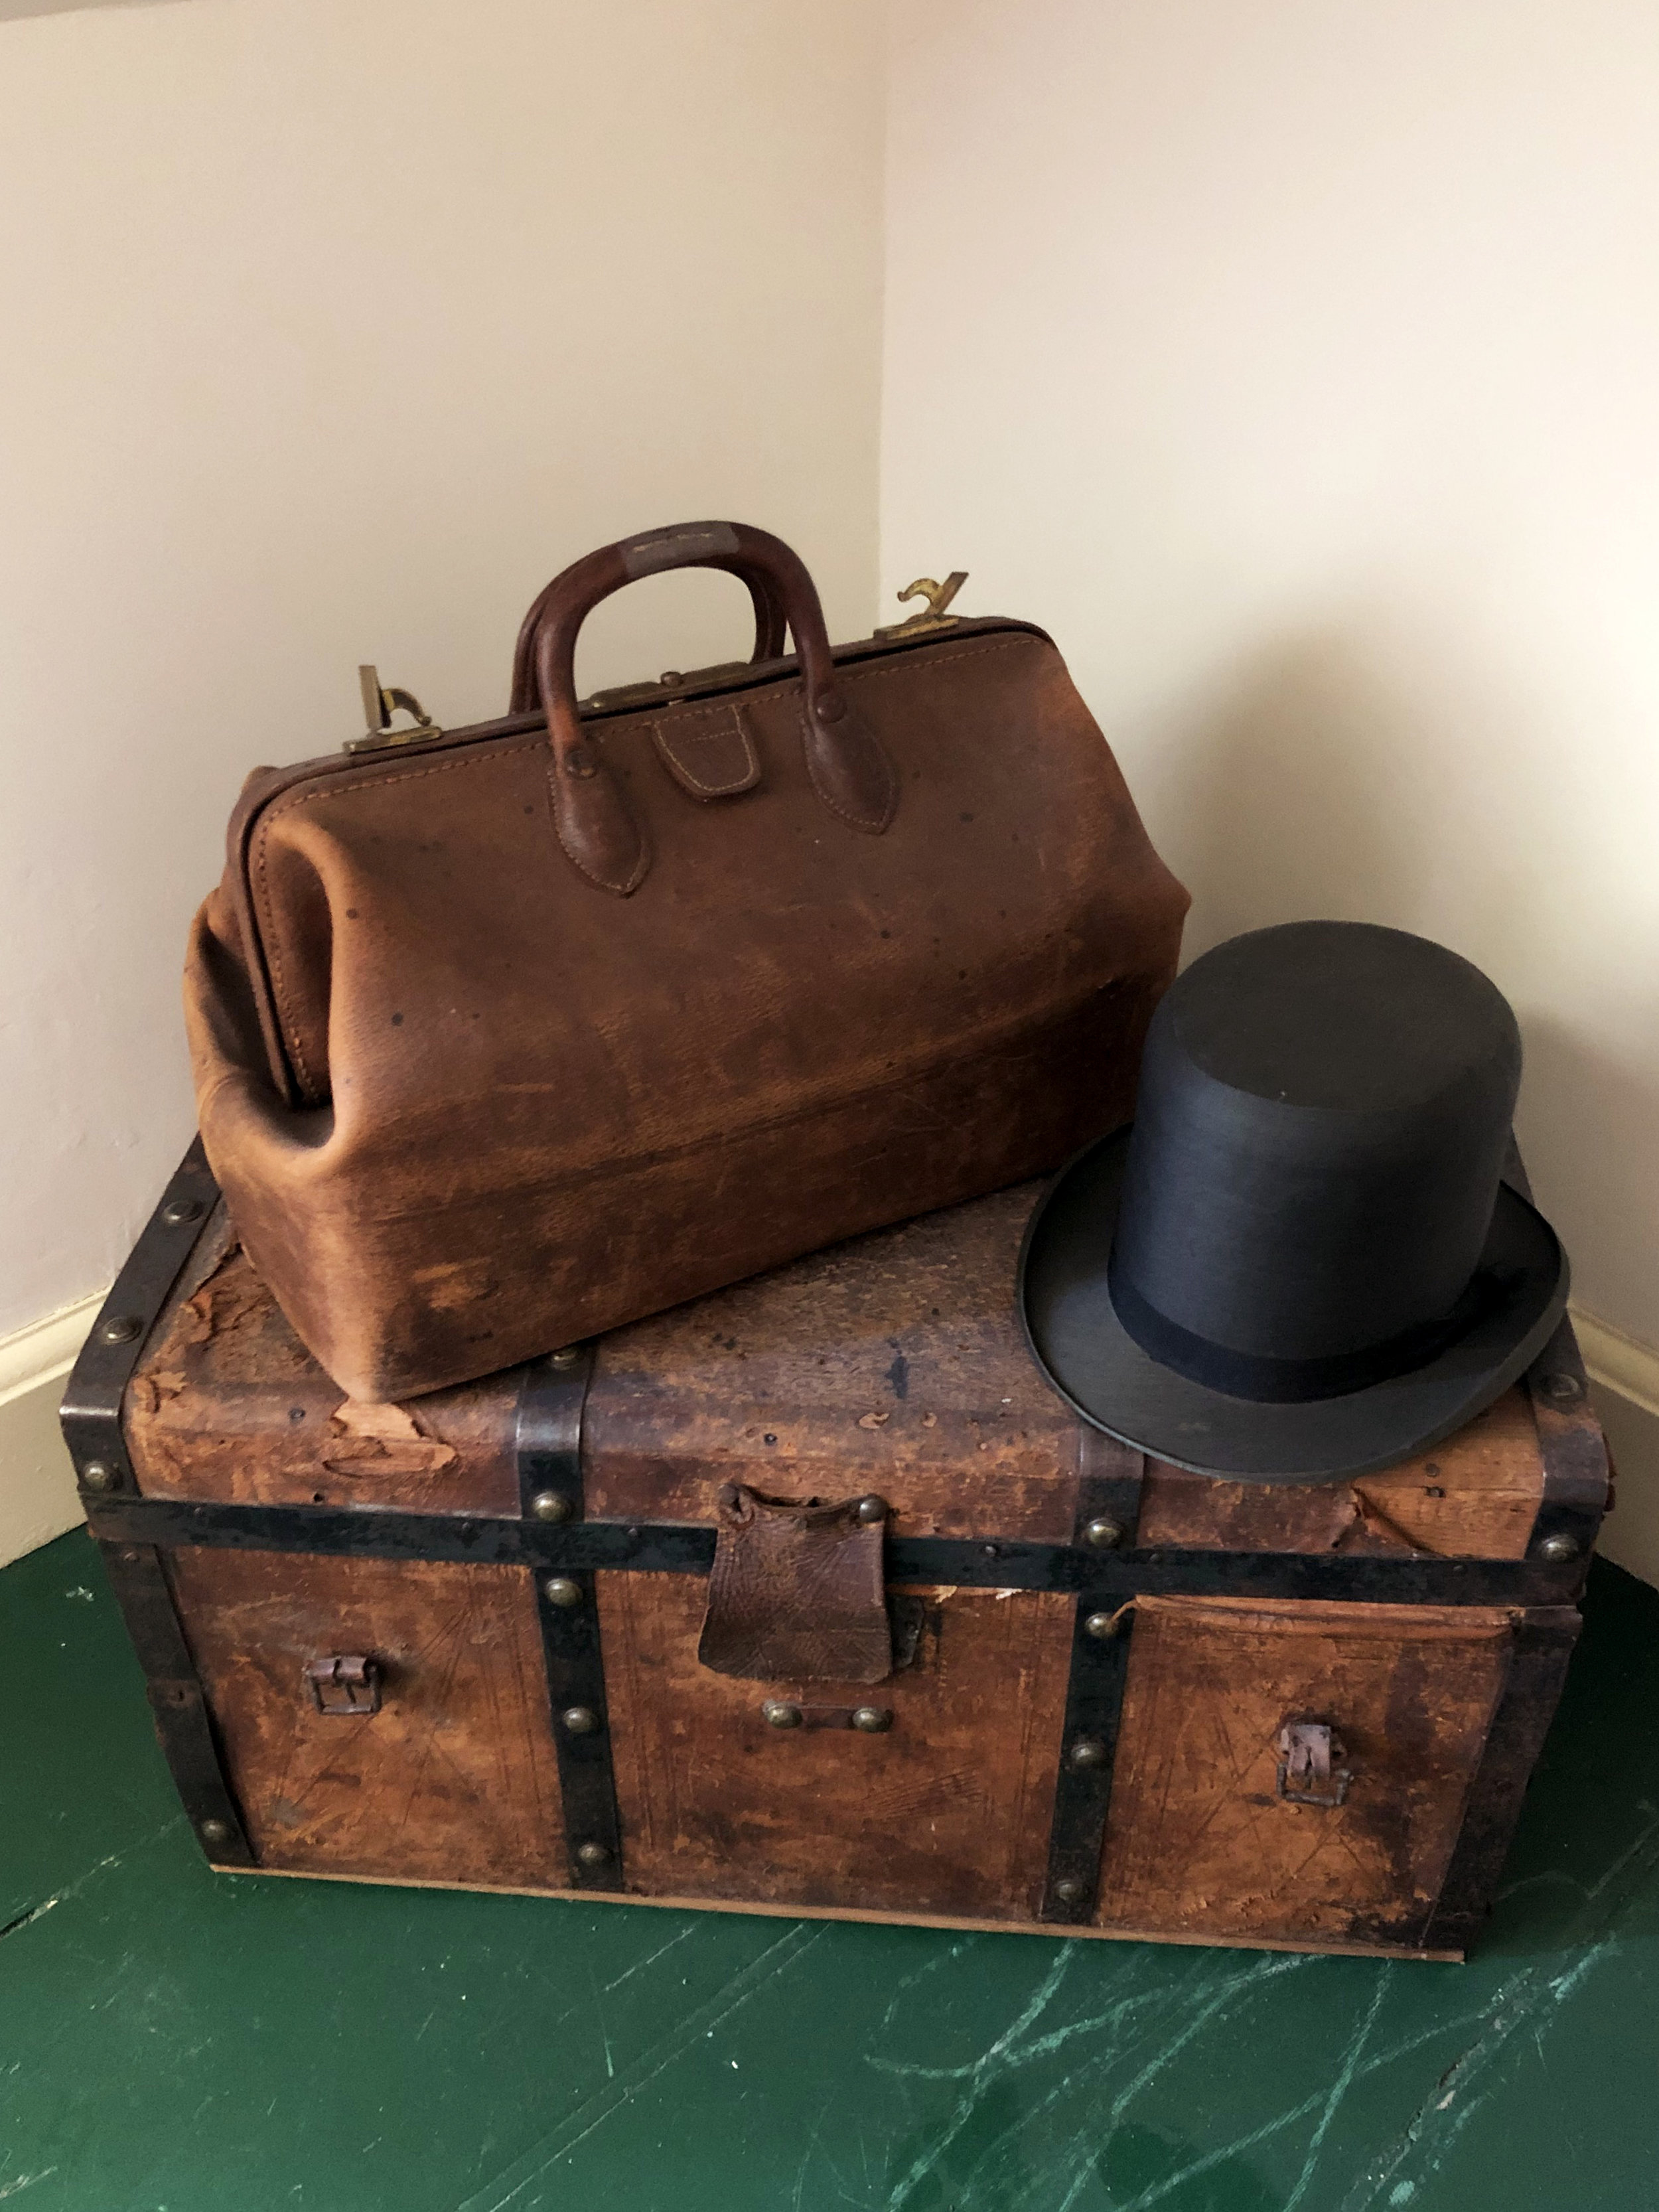 Squire-Doaks-tophat-trunk-bag.jpg